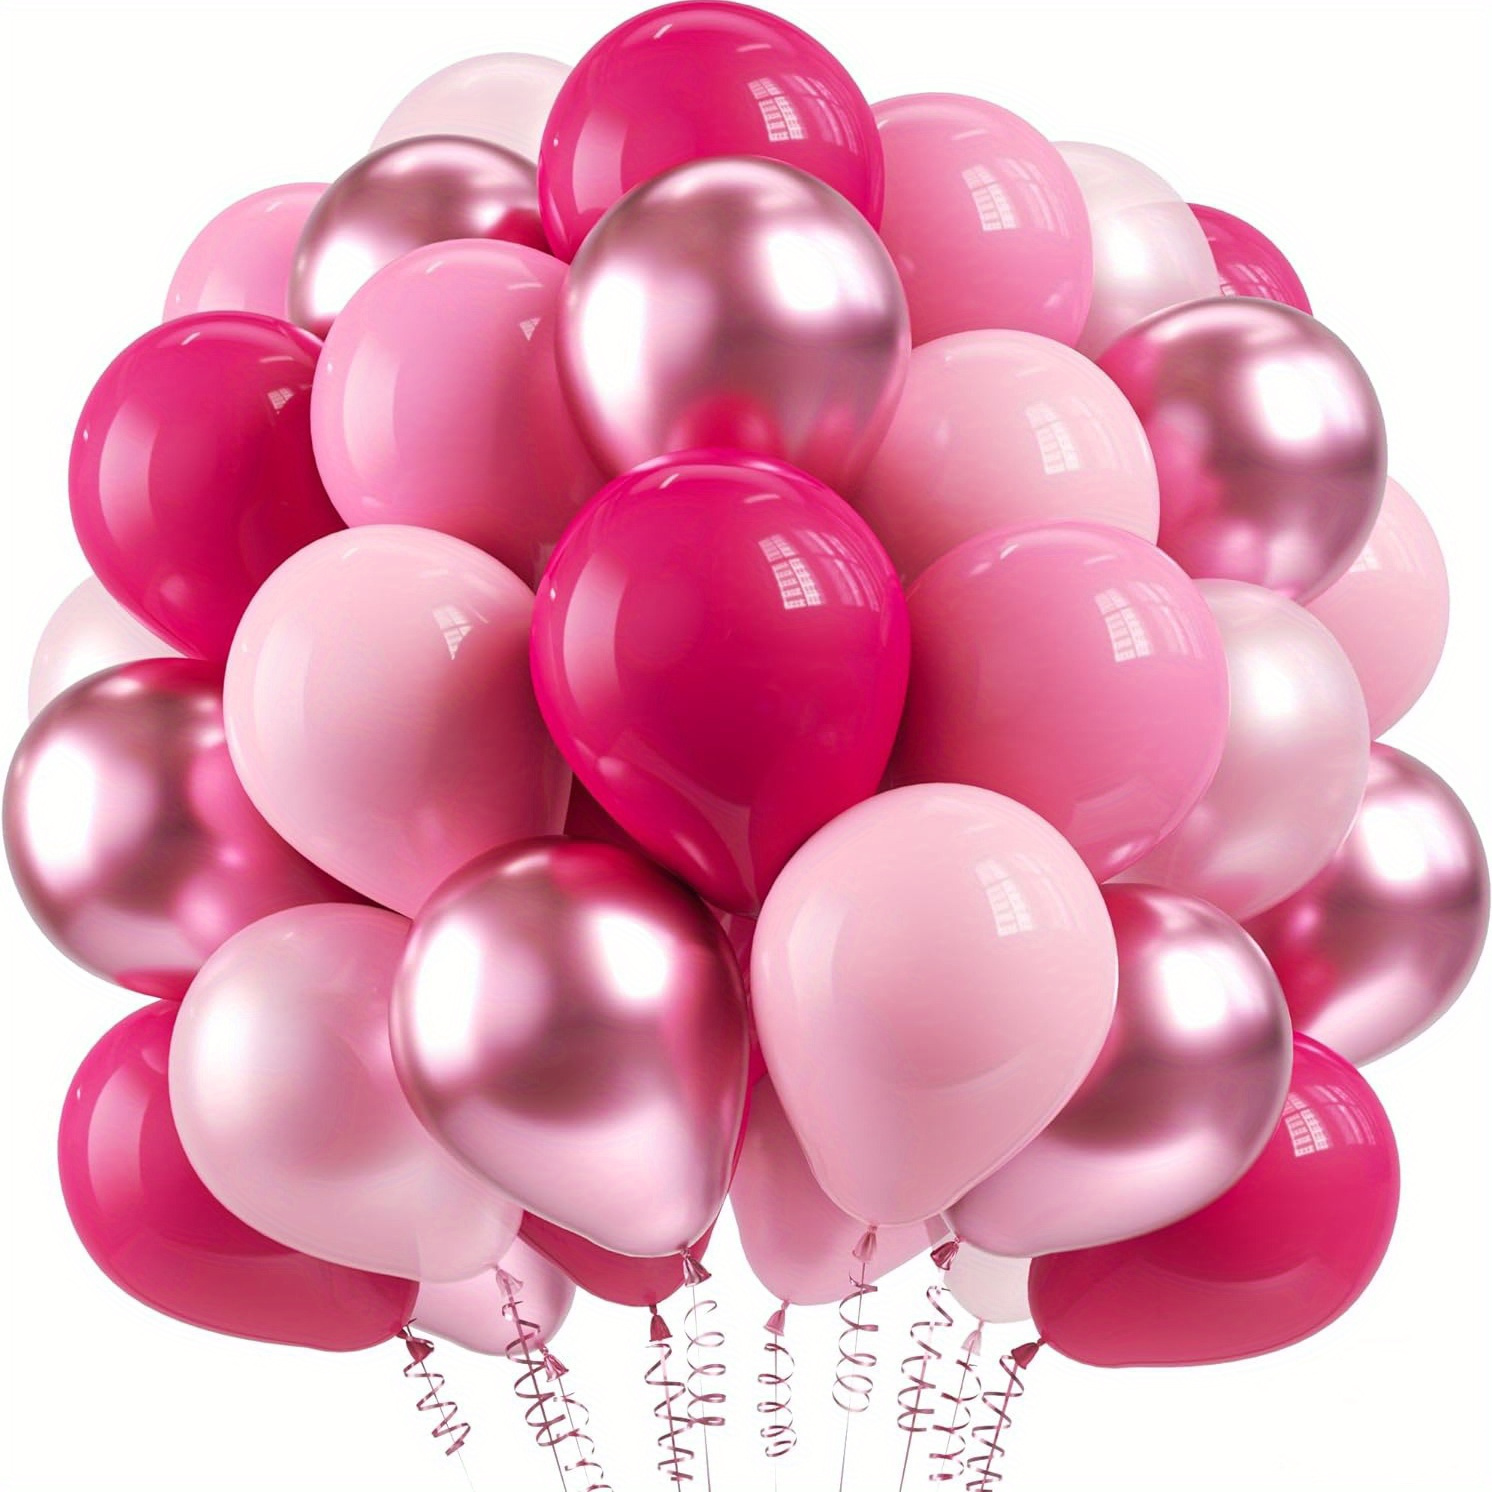 

50pcs Pink Latex Balloon Set - Emulsion Balloons For Celebrations - Ideal For Birthday, Wedding, Gender Reveal, Bridal & Baby Showers - For Ages 14+ - No Electricity Needed